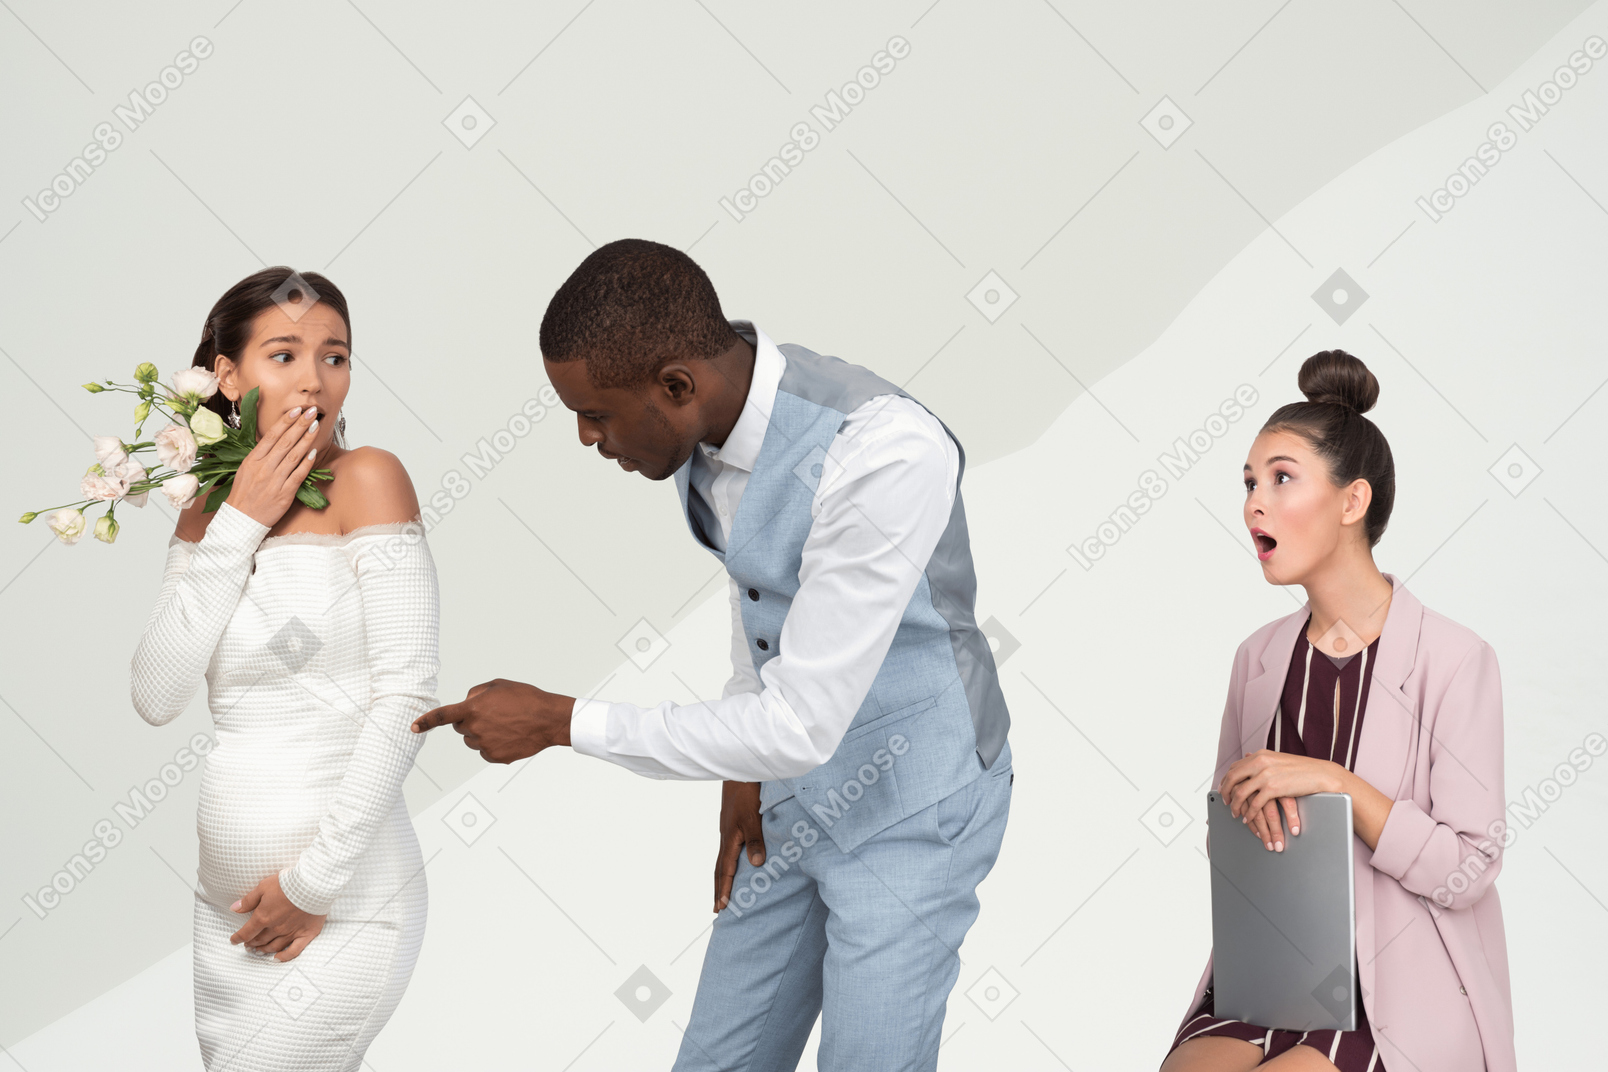 The groom shocked shows his finger on the pregnant belly of the bride and the girl near opened her mouth of surprise